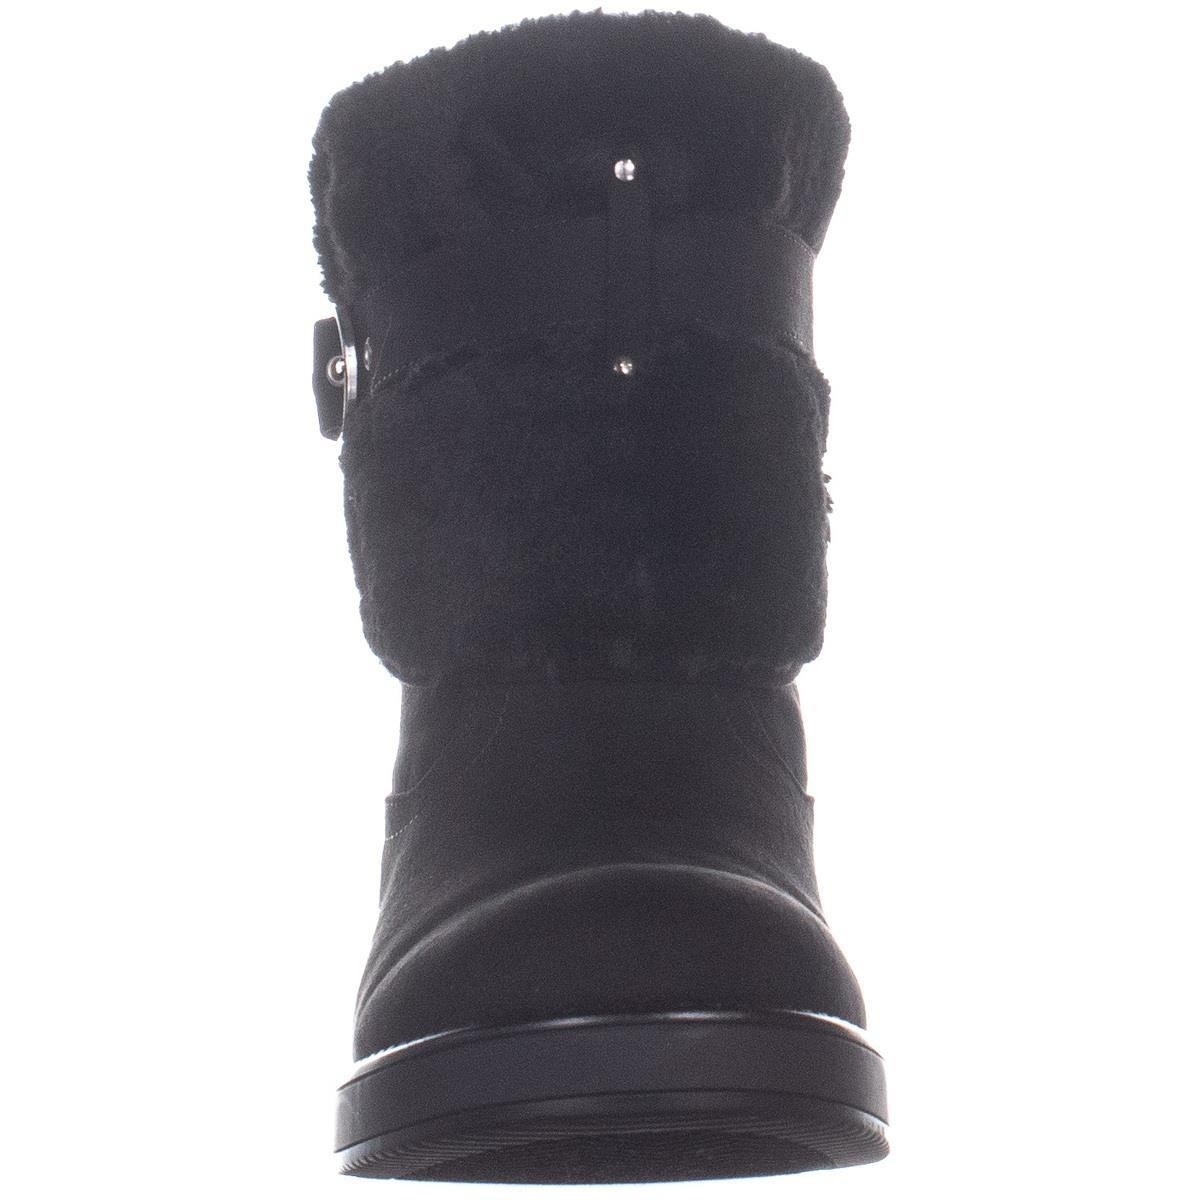 G By Guess Womens Aussie Closed Toe Ankle Cold Weather Boots Black Size 7.5